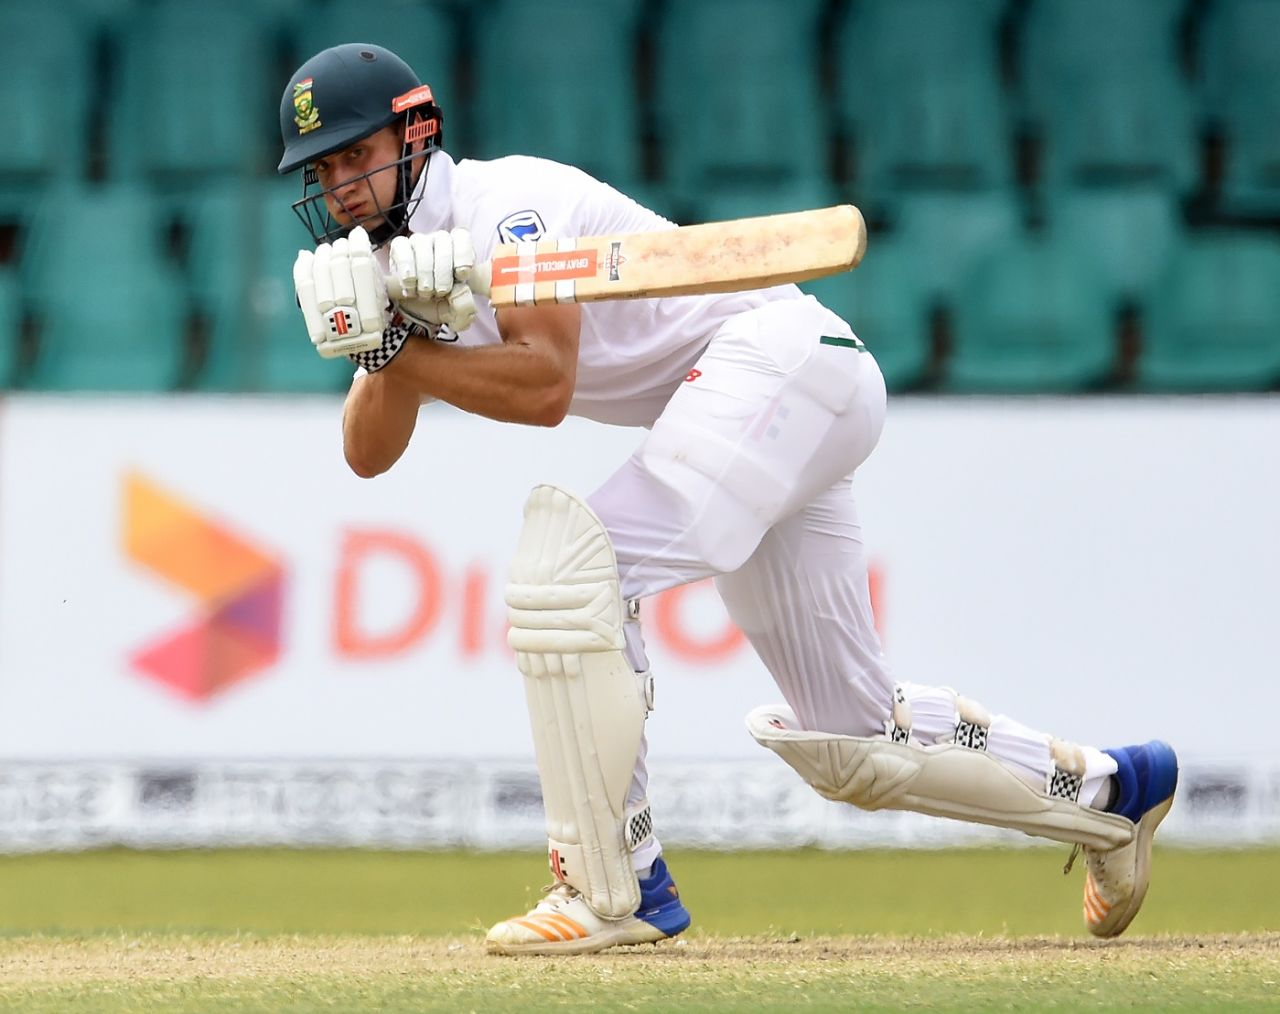 Theunis de Bruyn en route to his maiden Test century, Sri Lanka v South Africa, 2nd Test, SSC, 4th day, July 23, 2018